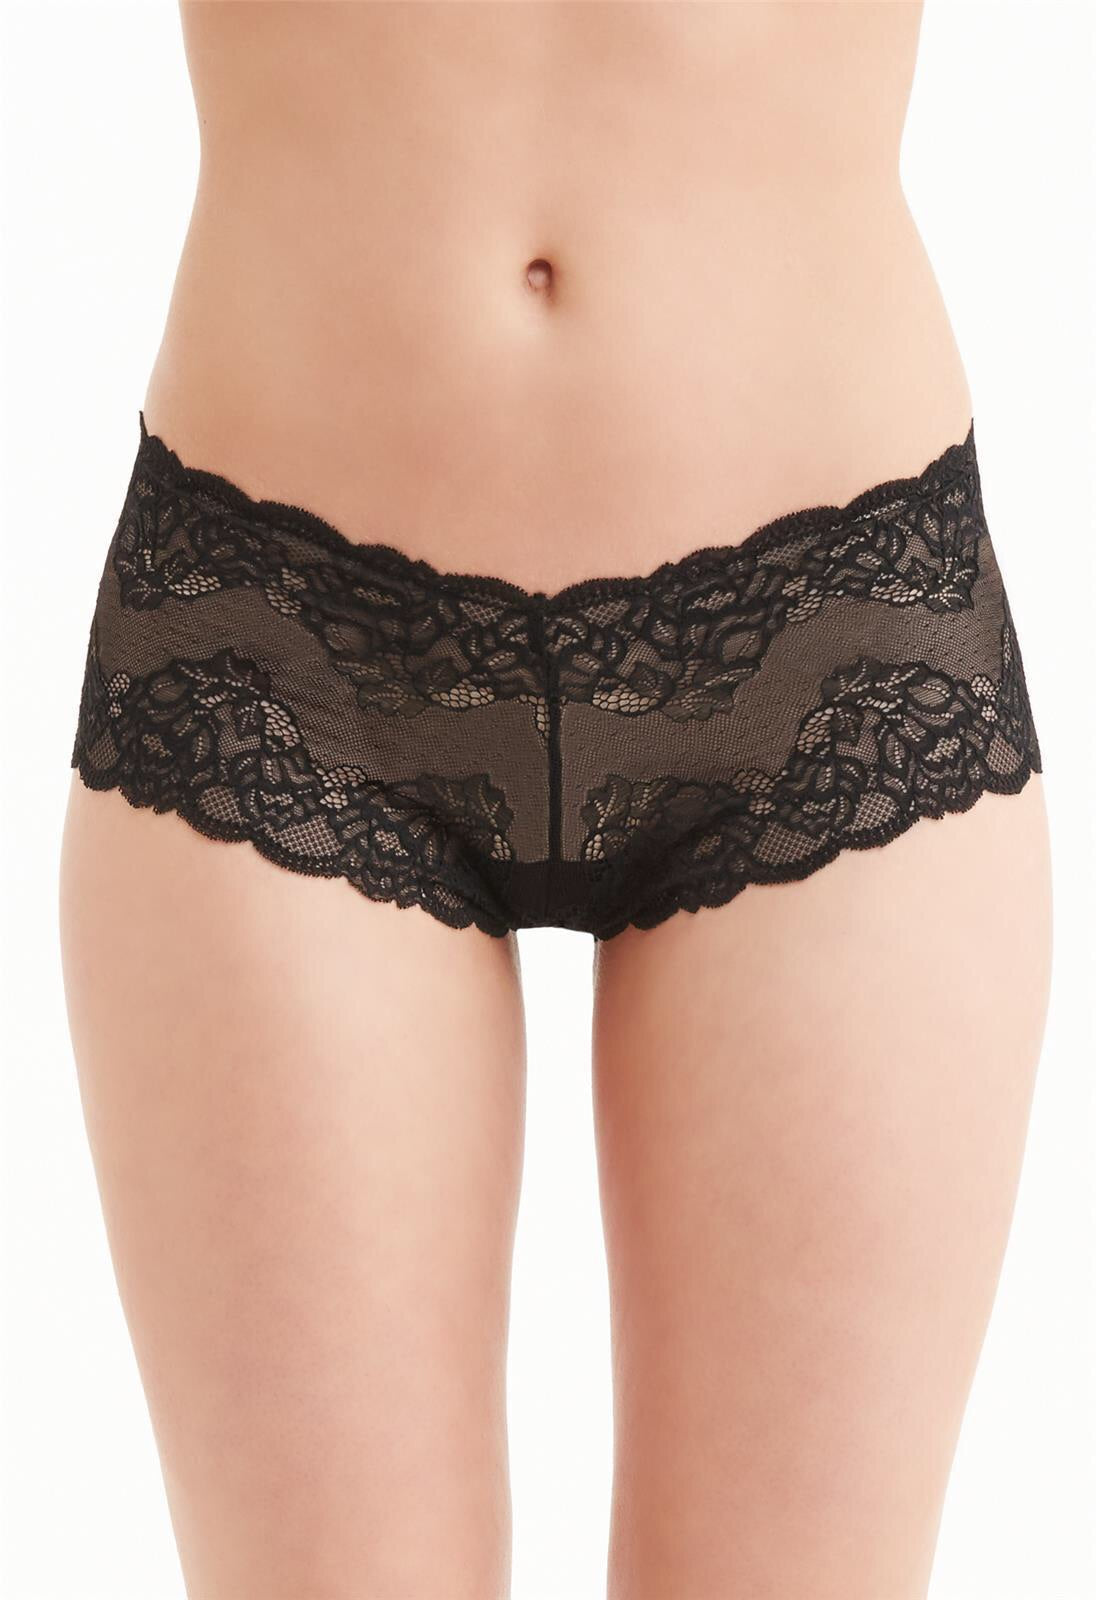 MONTELLE 9000 LACE CHEEKY PANTY IN BLACK